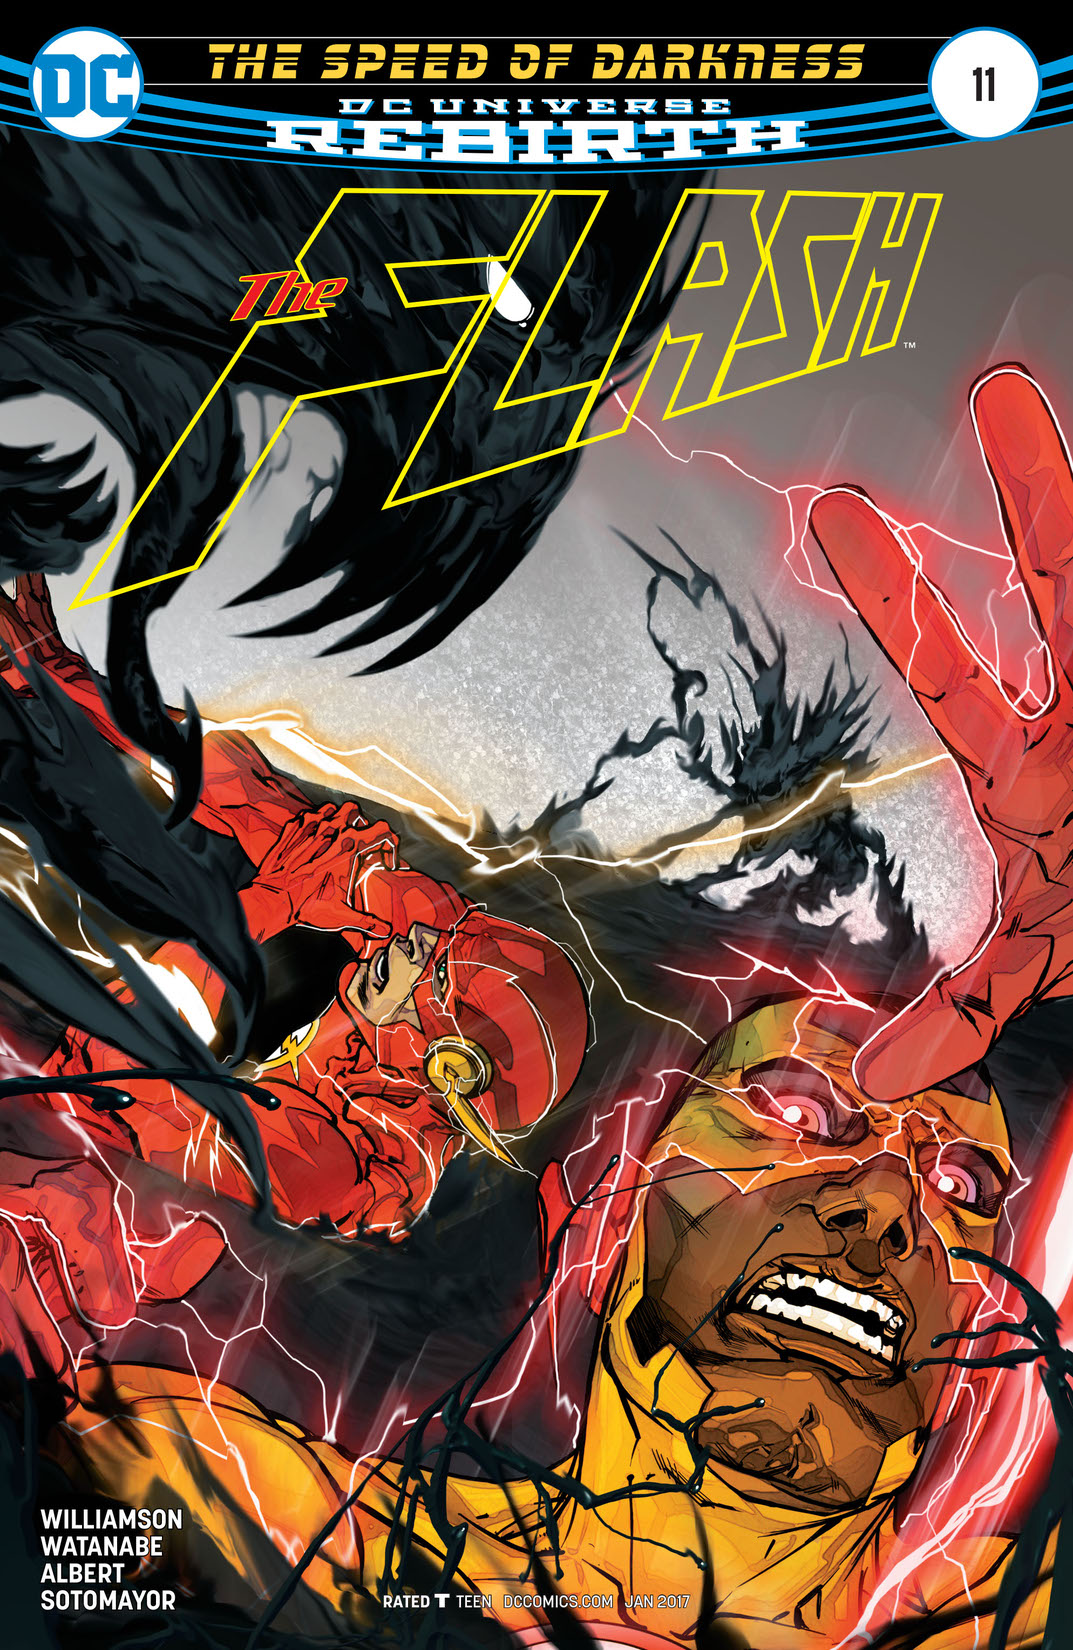 The Flash (2016-) #11 preview images